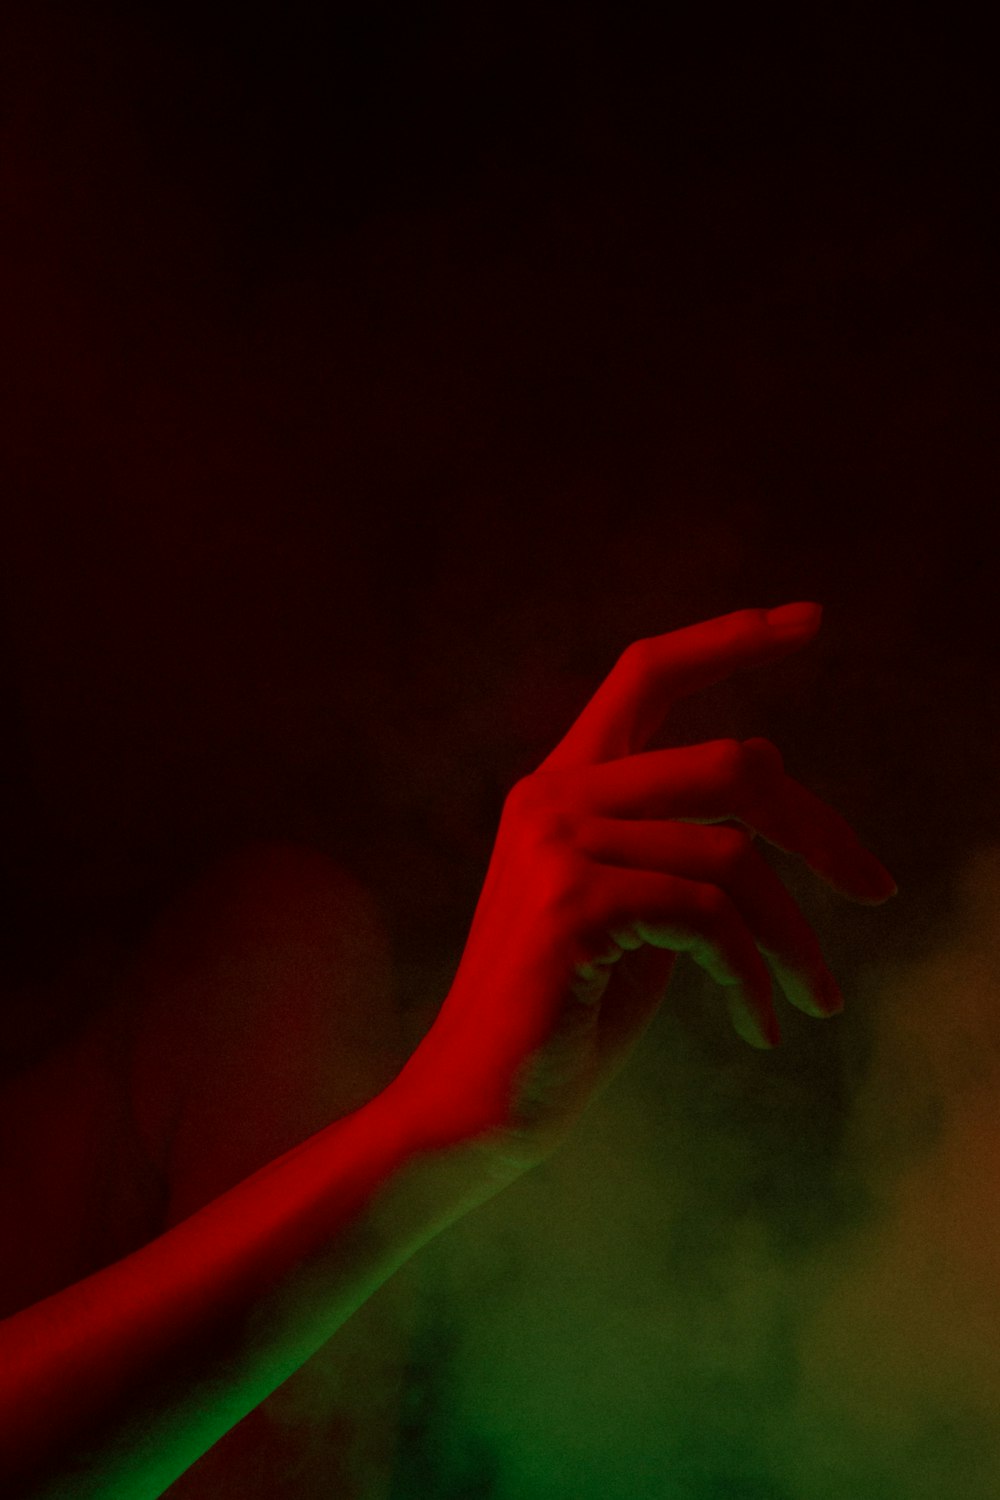 a person's hand reaching for something in the dark